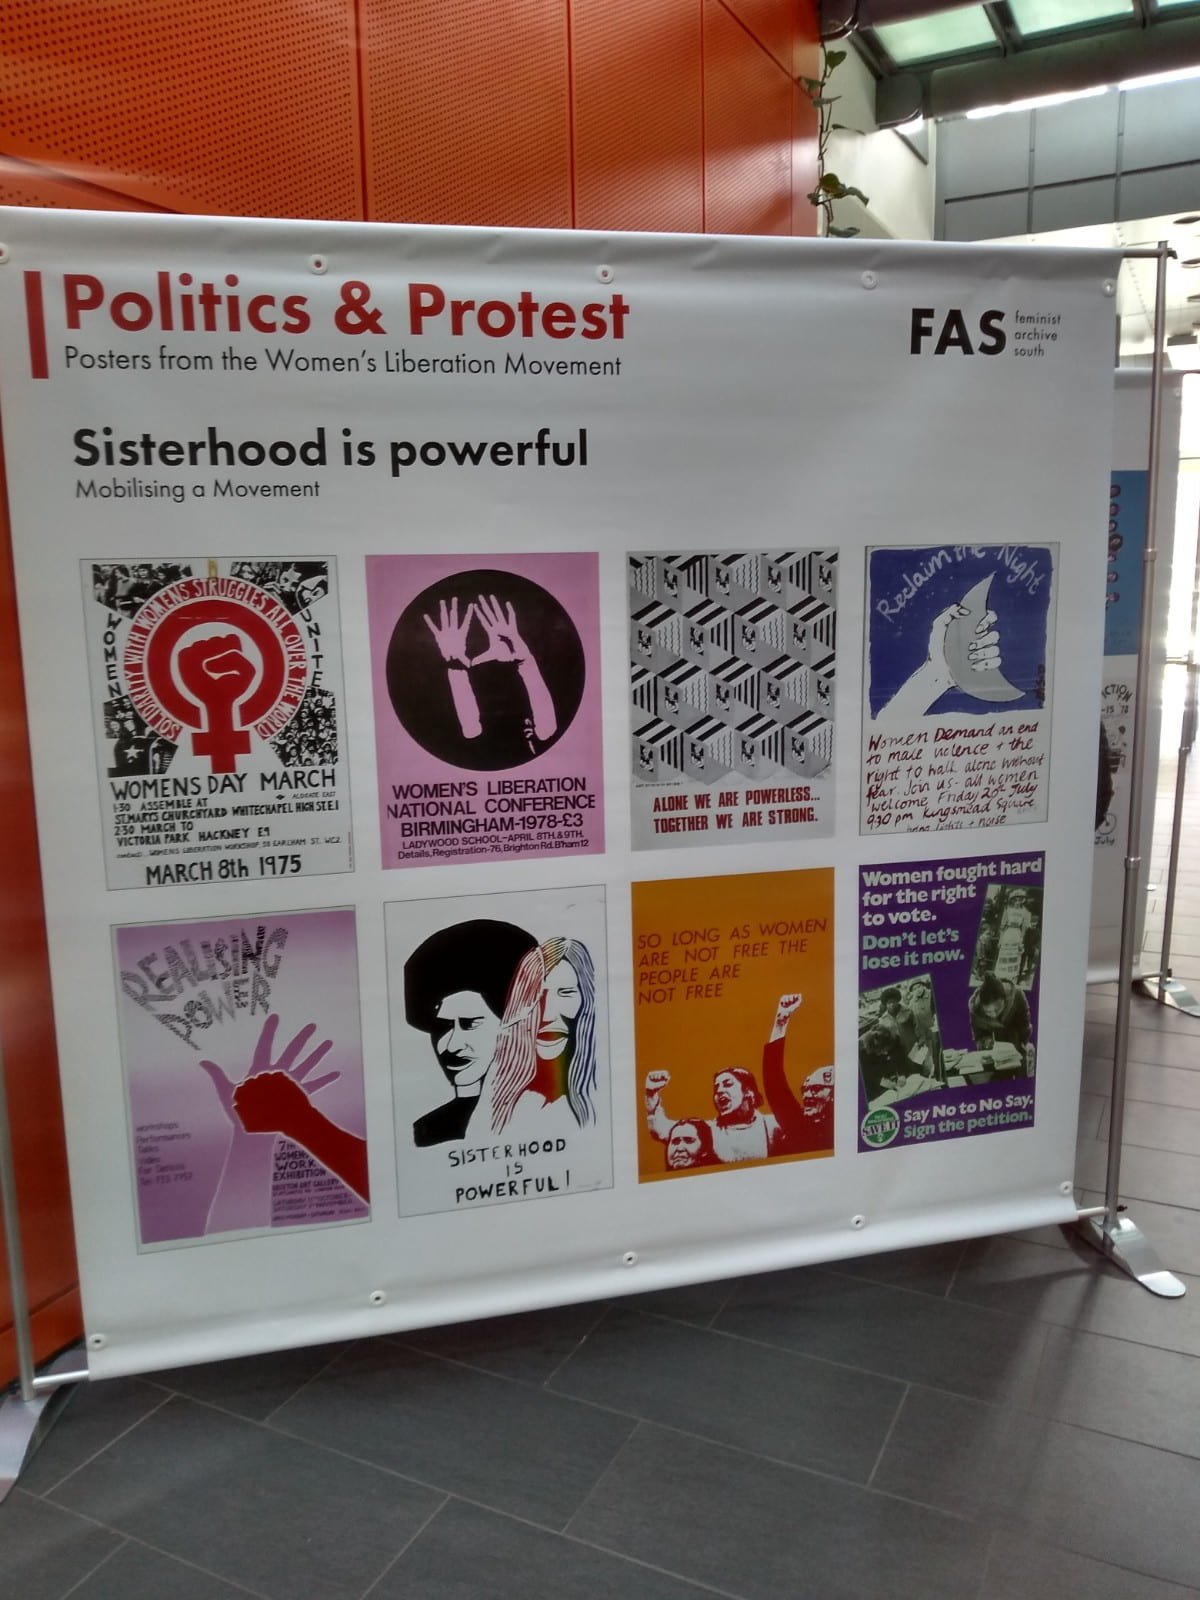 Politics & Protest exhibition banners in the University of Bristol Life Sciences Building. 